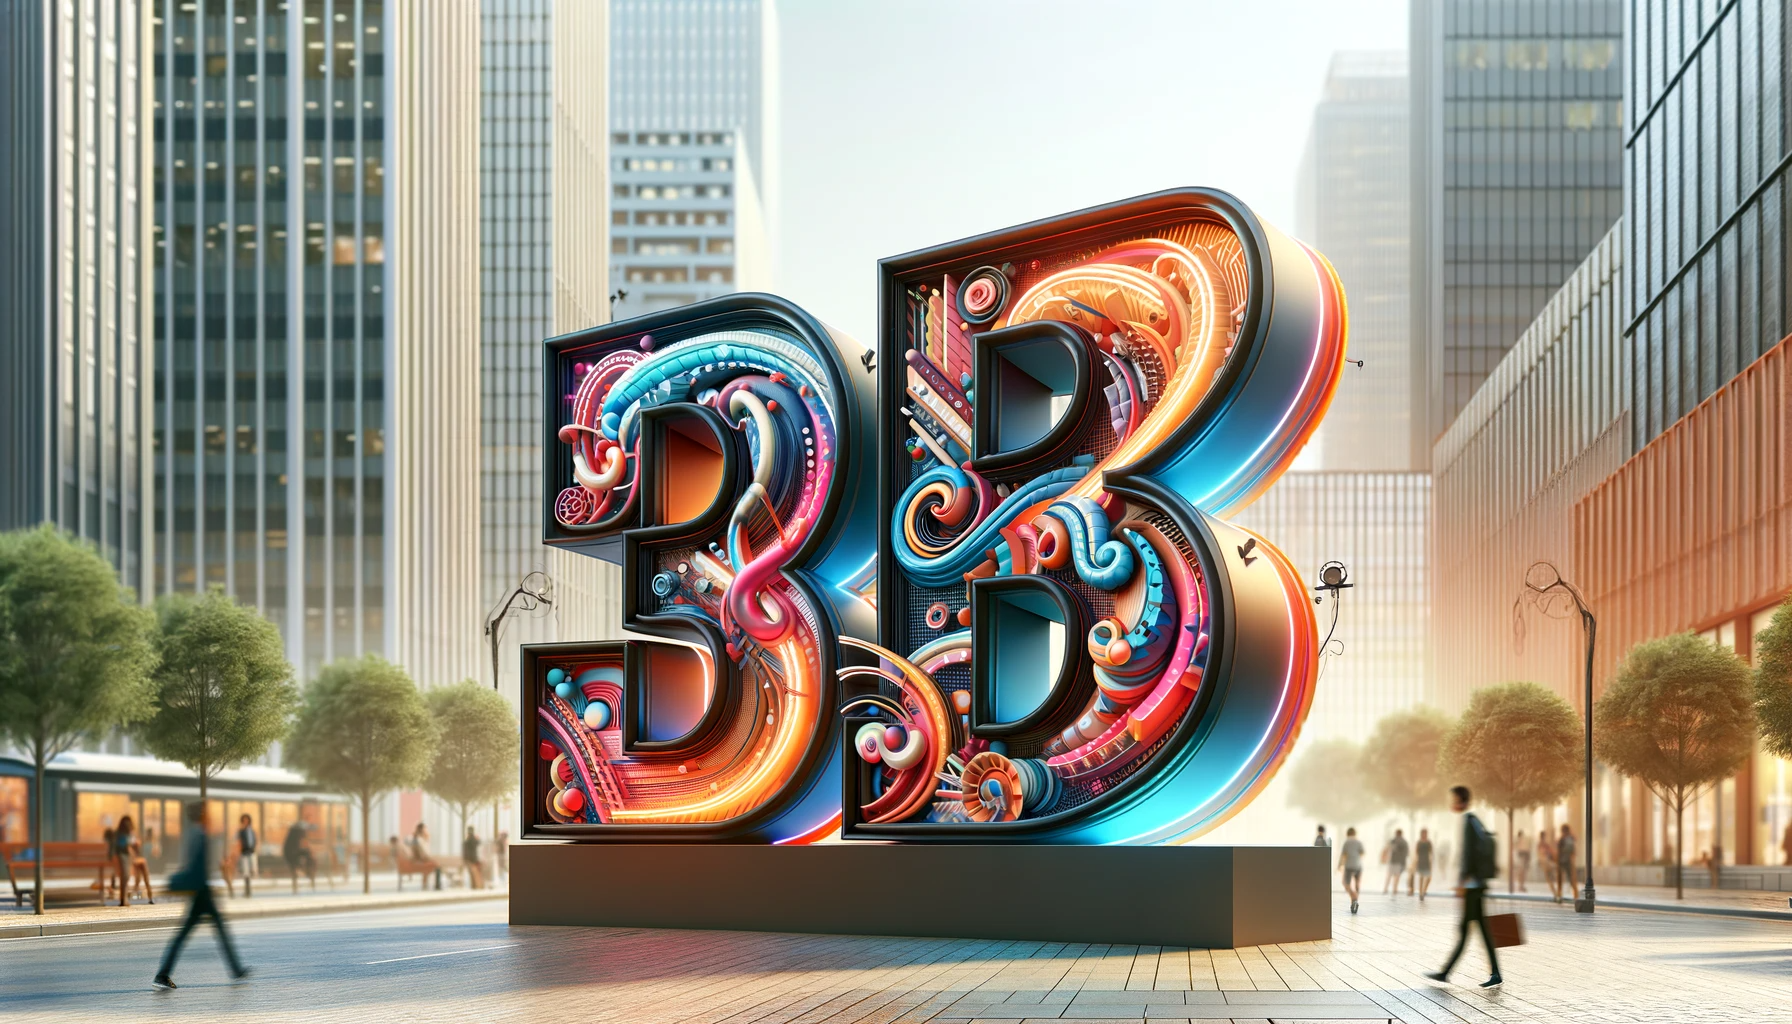 dall·e 2024 01 29 18 13 06 an image showcasing a vibrant and creative 3d letter advertisement in an urban setting the letters are large, three dimensional, and artistically des